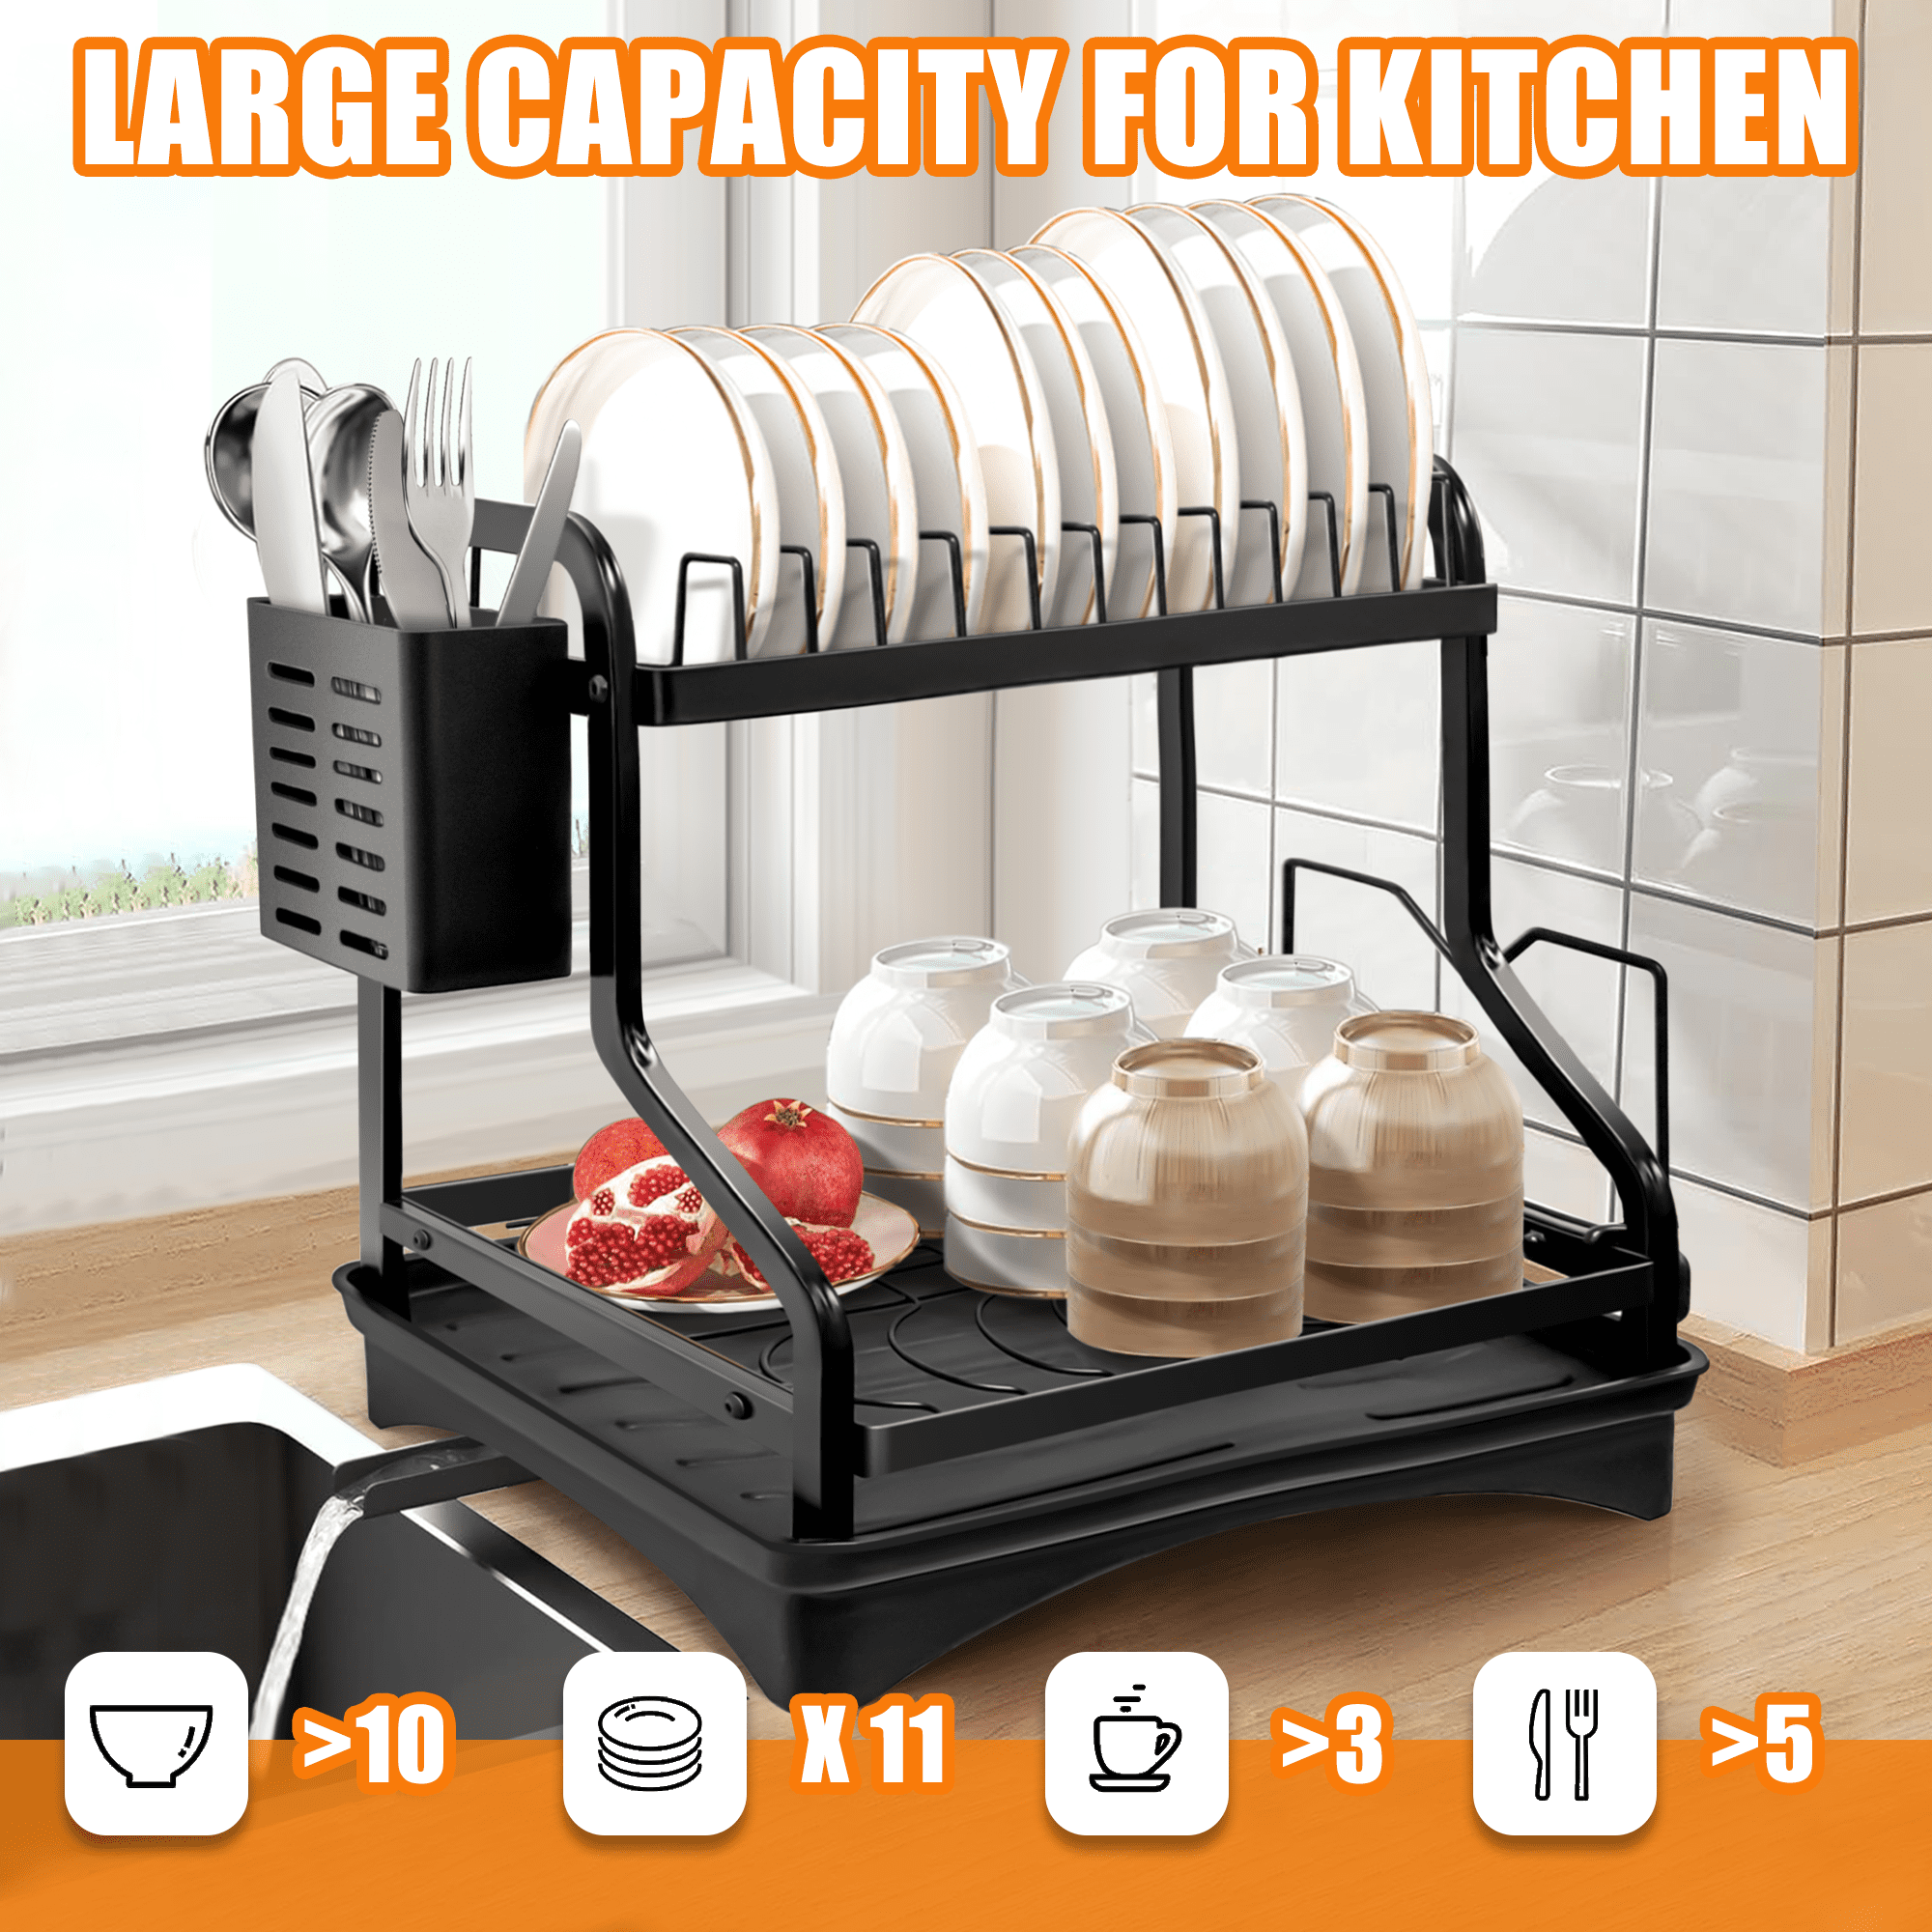 Riousery 2 Tier Dish Racks for Kitchen Counter, Dish Drying Rack